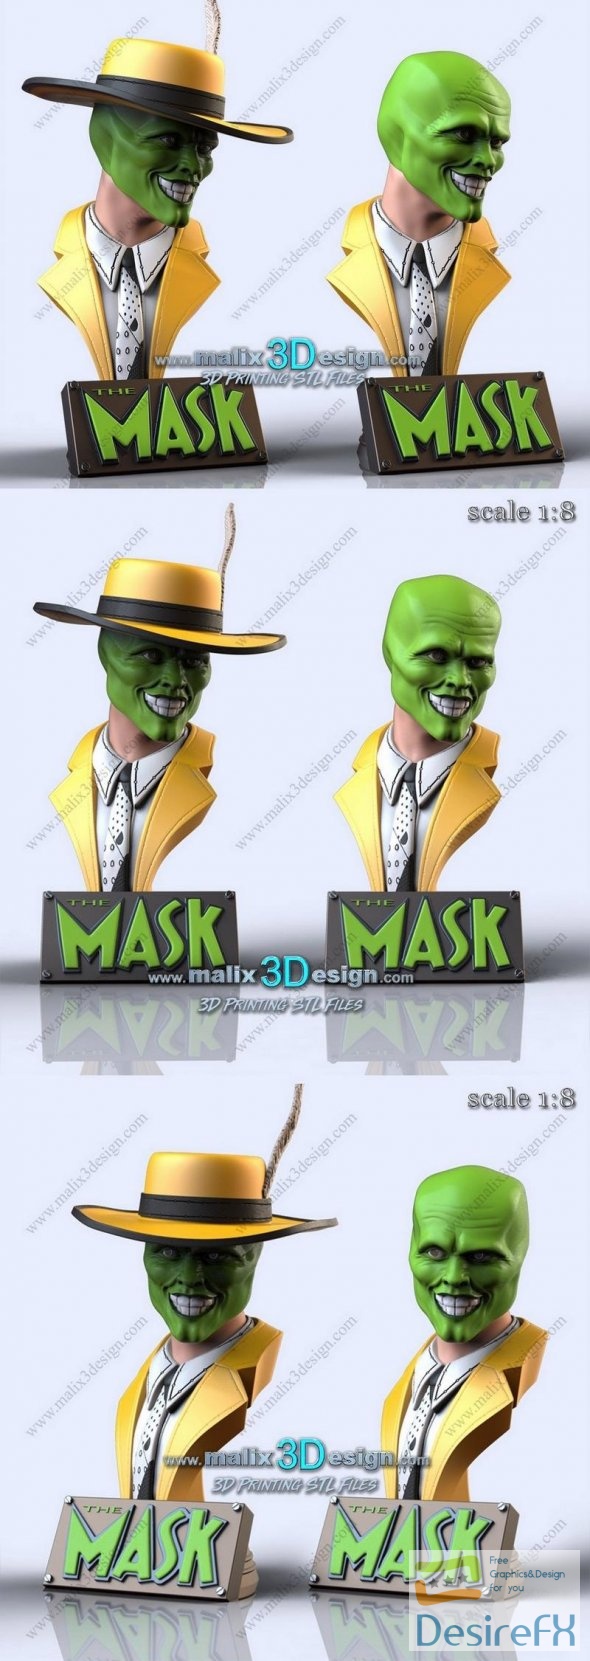 The Mask Bust 3D Print